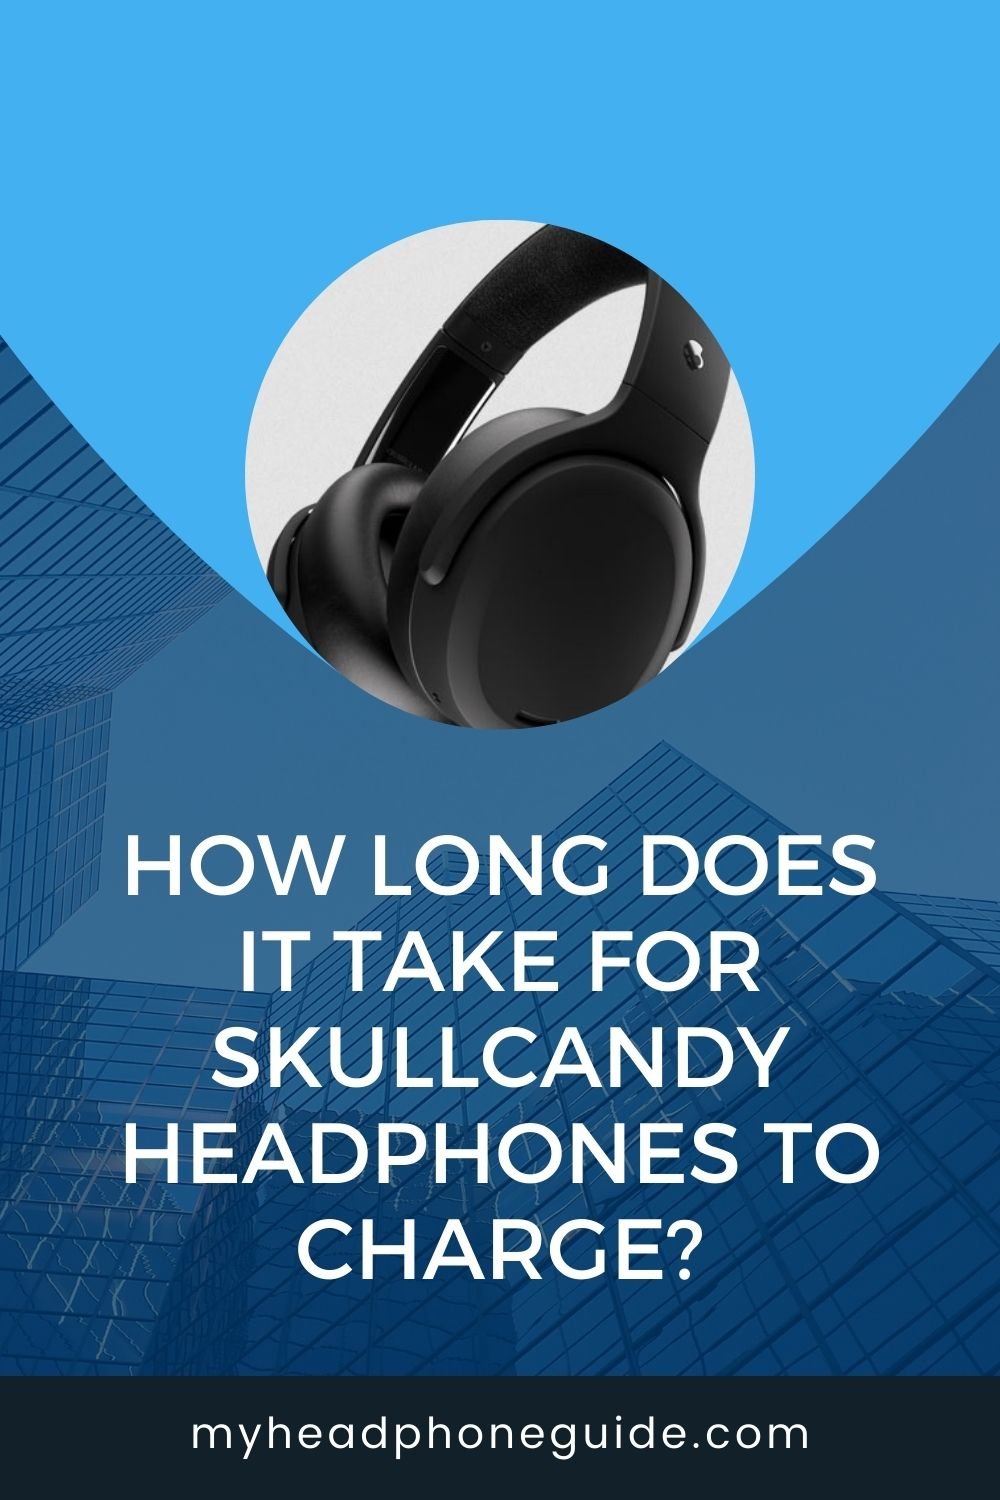 How Long Does It Take for Skullcandy Headphones to Charge?